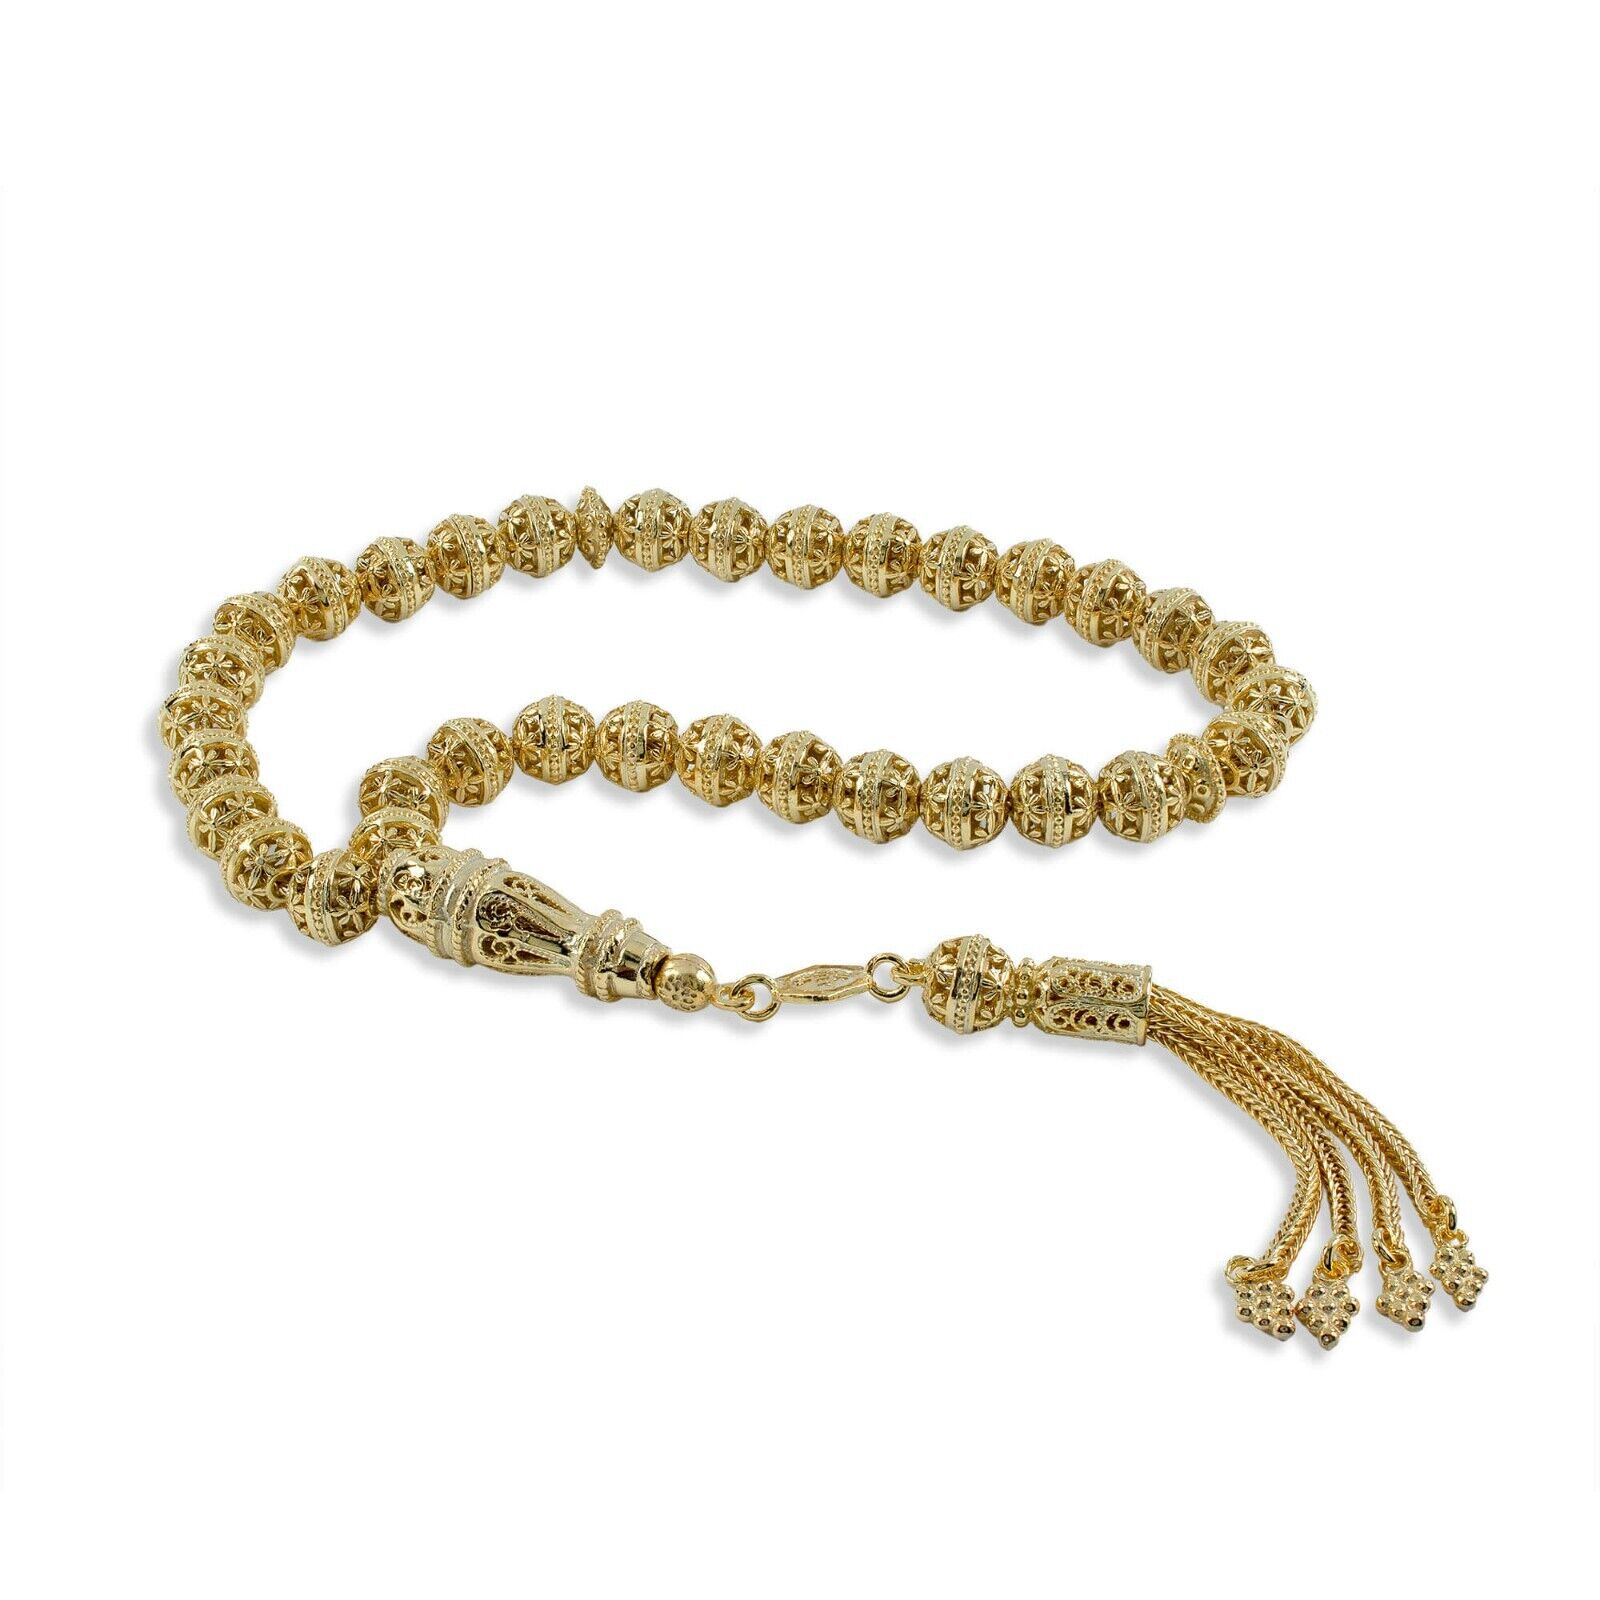 18k Gold Plated Solid Sterling Silver Filigree Art Tasbih Prayer Worry Beads